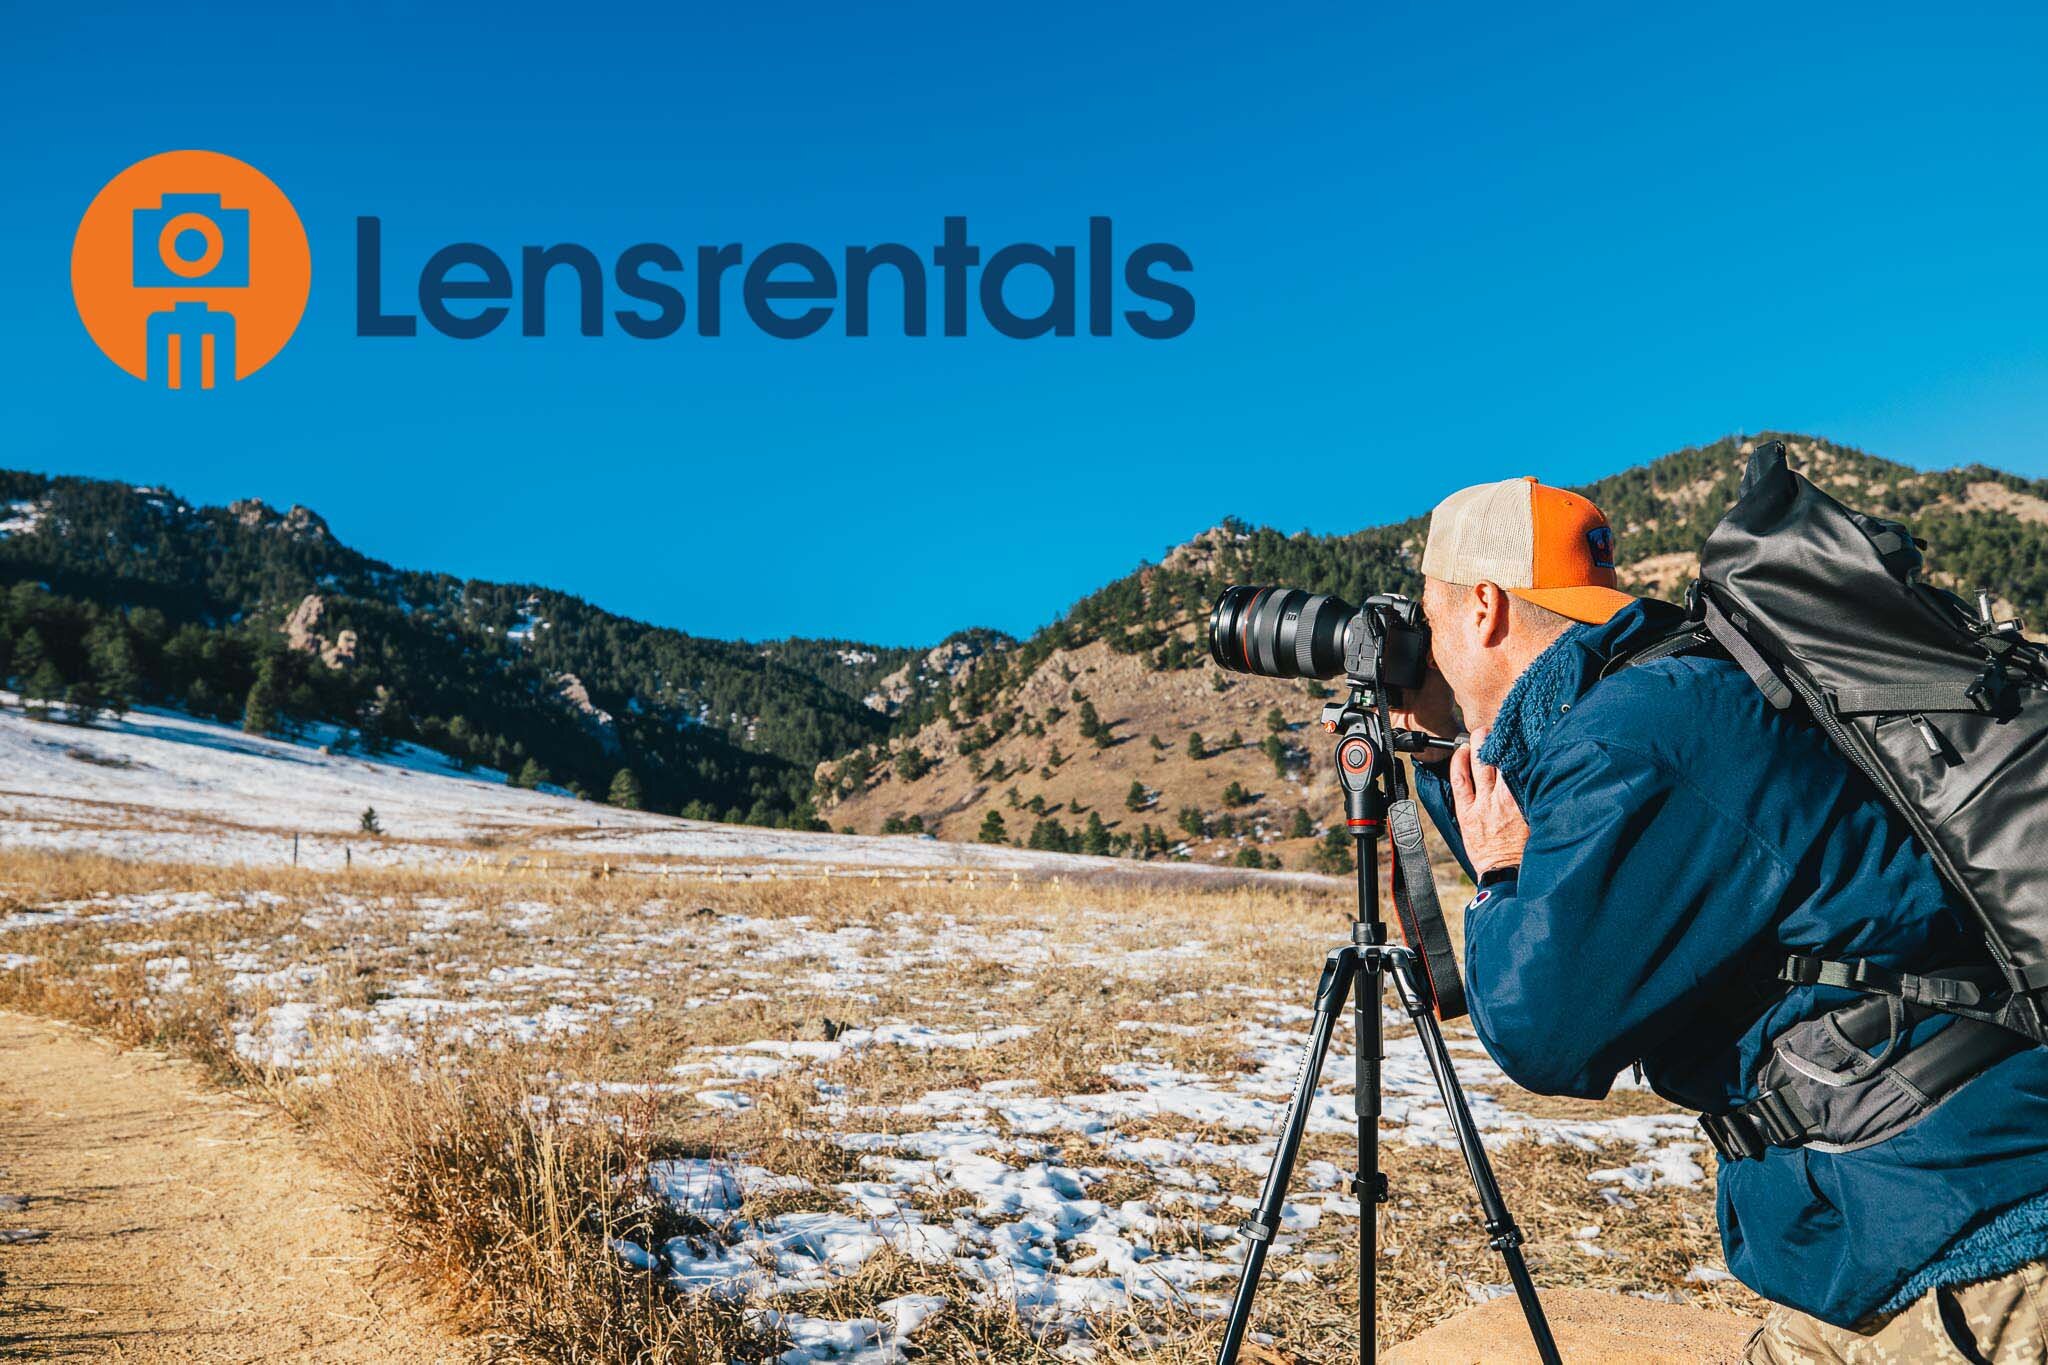 Review: My Experience With Renting Camera Gear From LensRentals